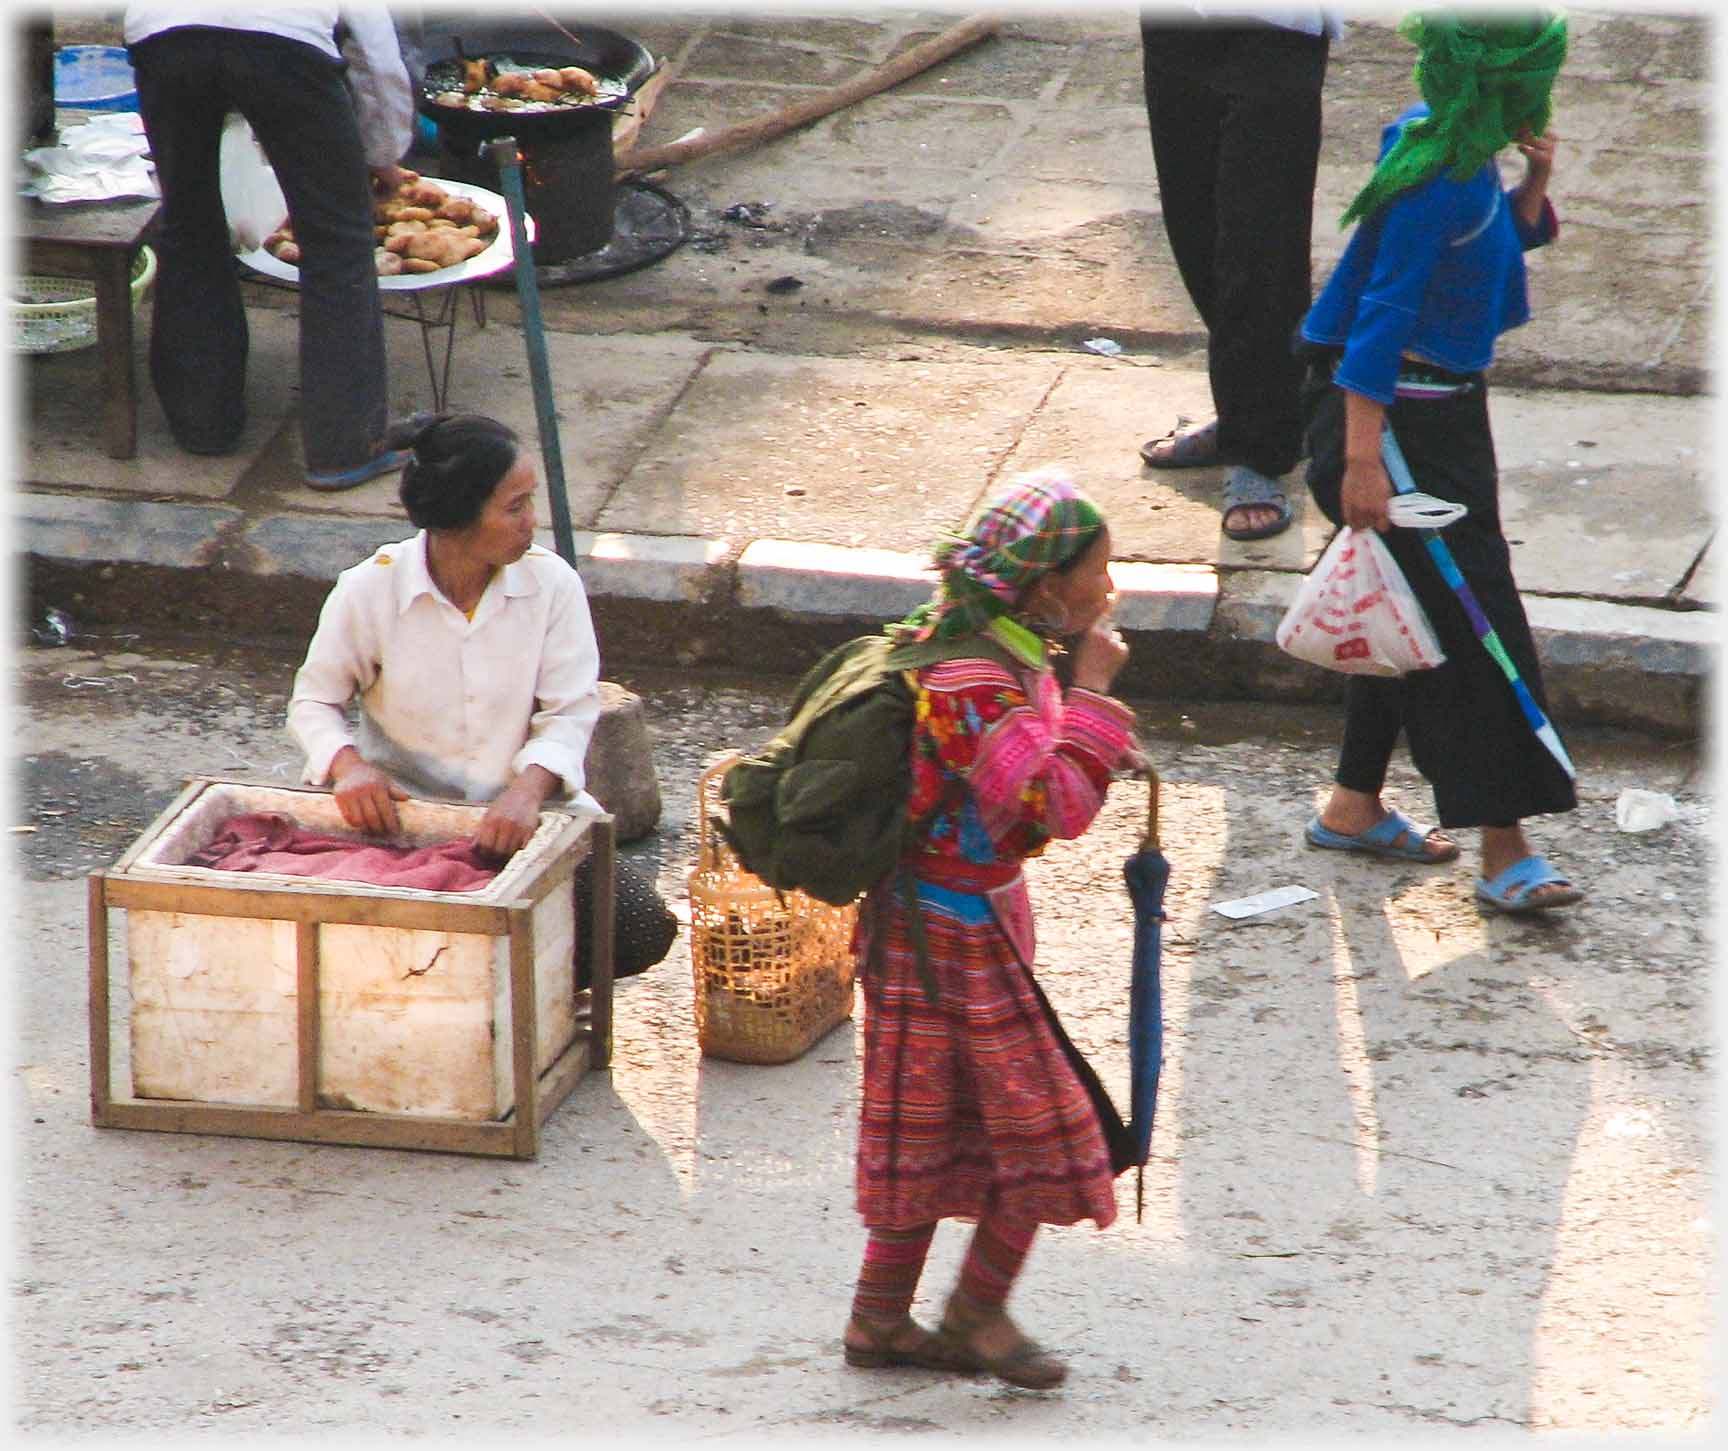 Vendor with box, older woman with umbrella passing.